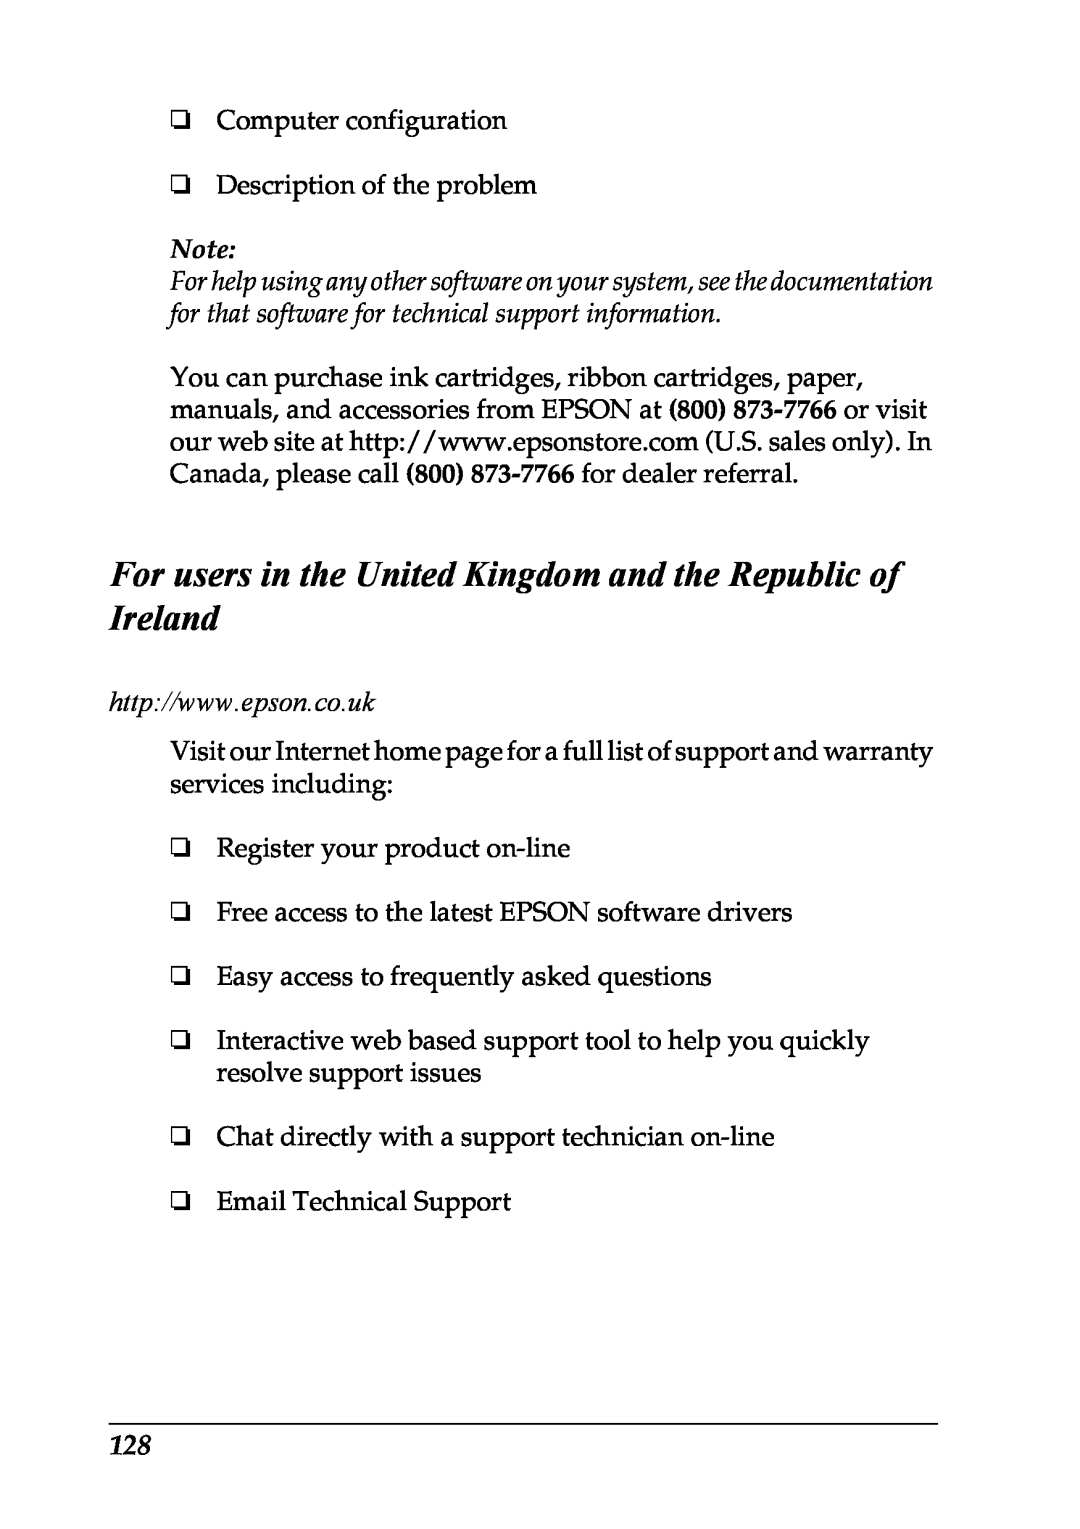 Epson LX-1170 manual For users in the United Kingdom and the Republic of Ireland 